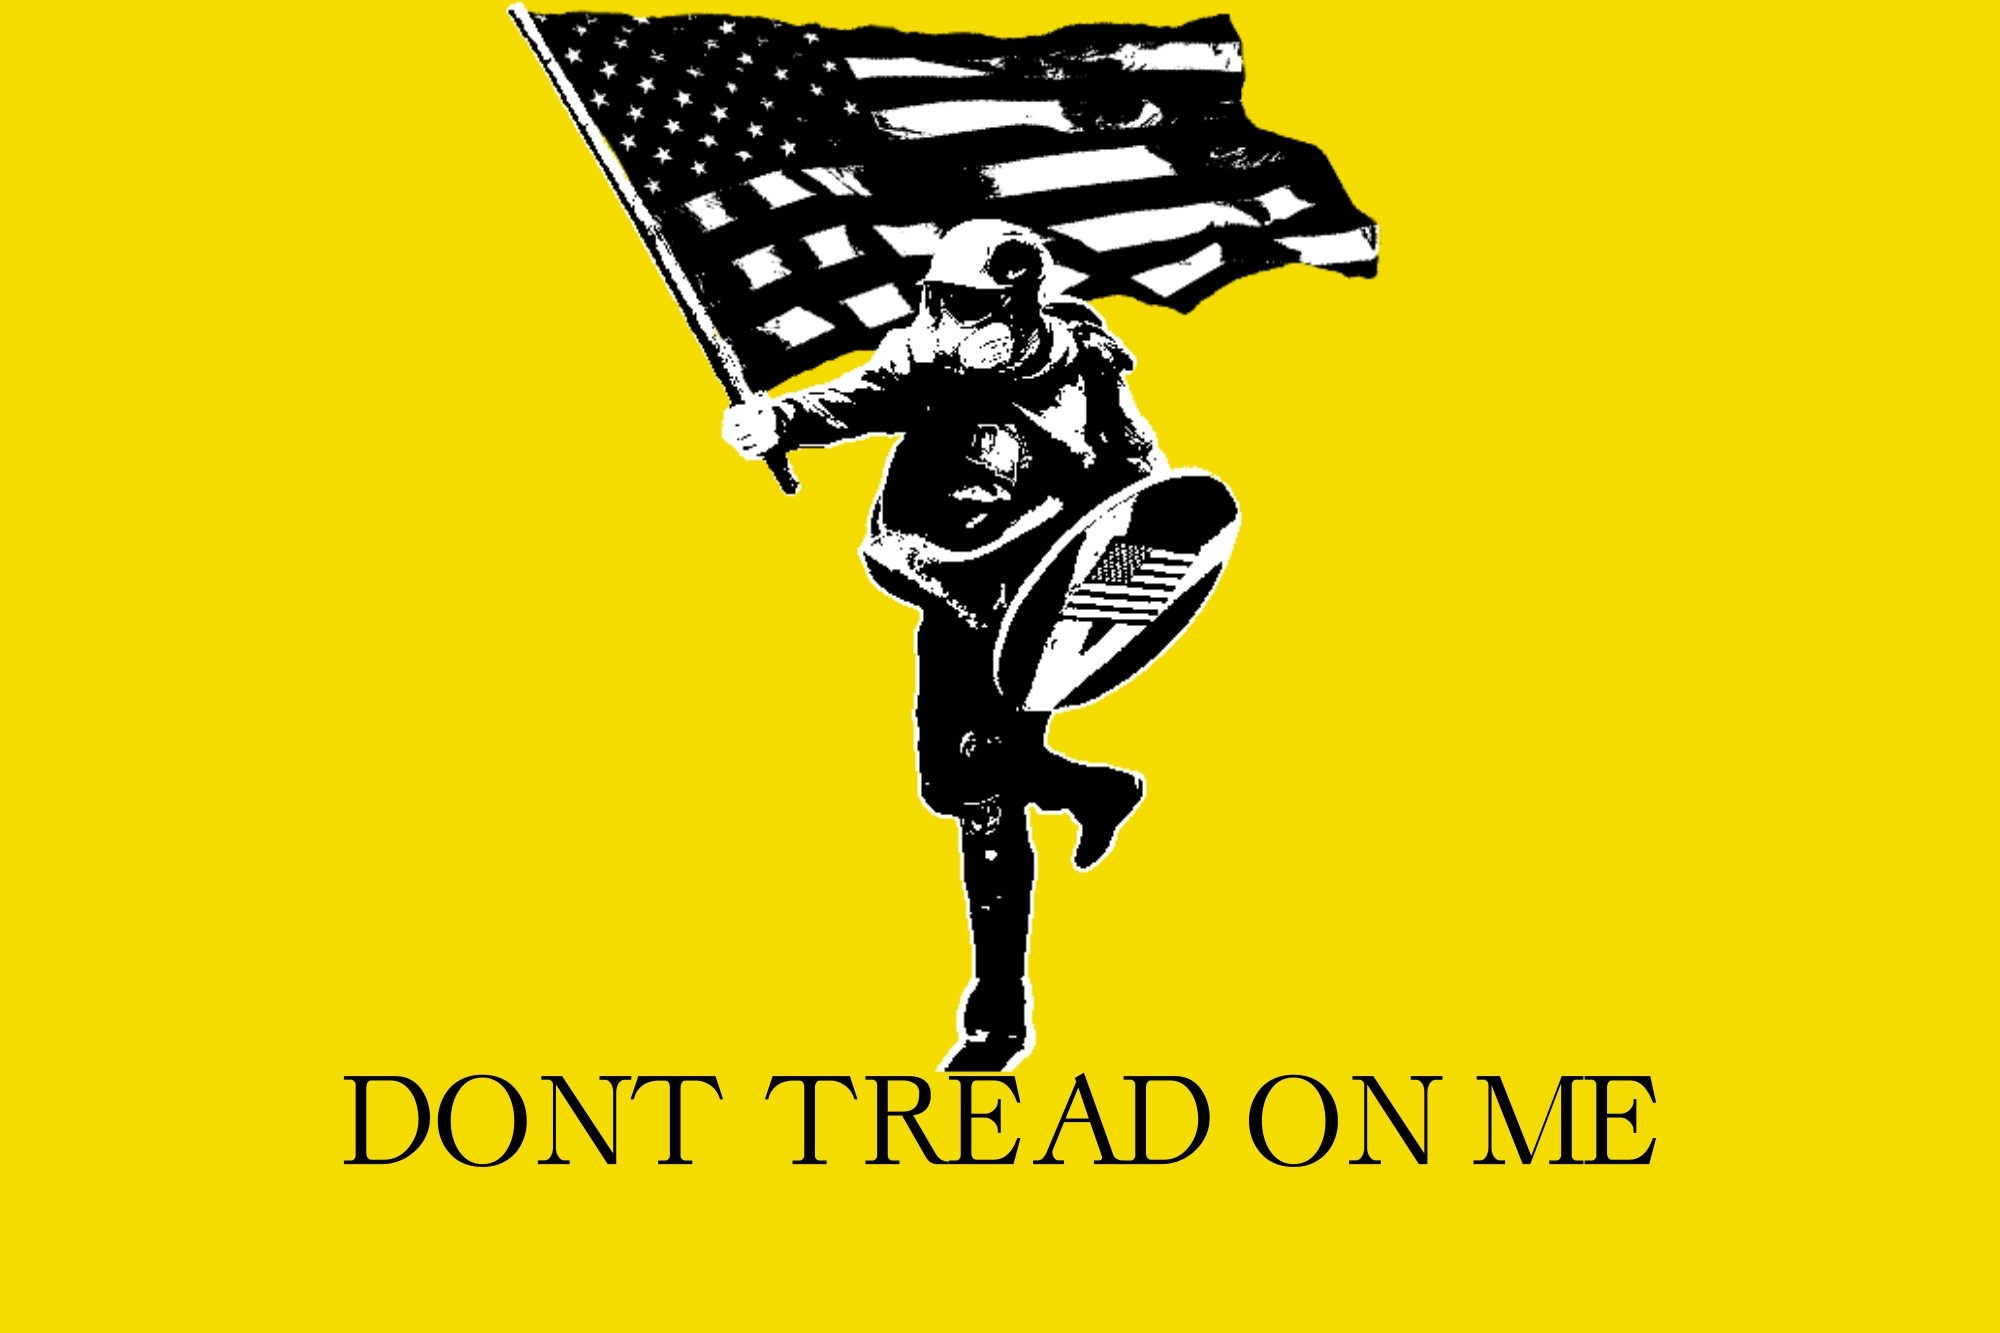 Dont Tread On Me Clothing  American Freedom Bundle  55 OFF Shirt  flag hat keychain and decal   Facebook